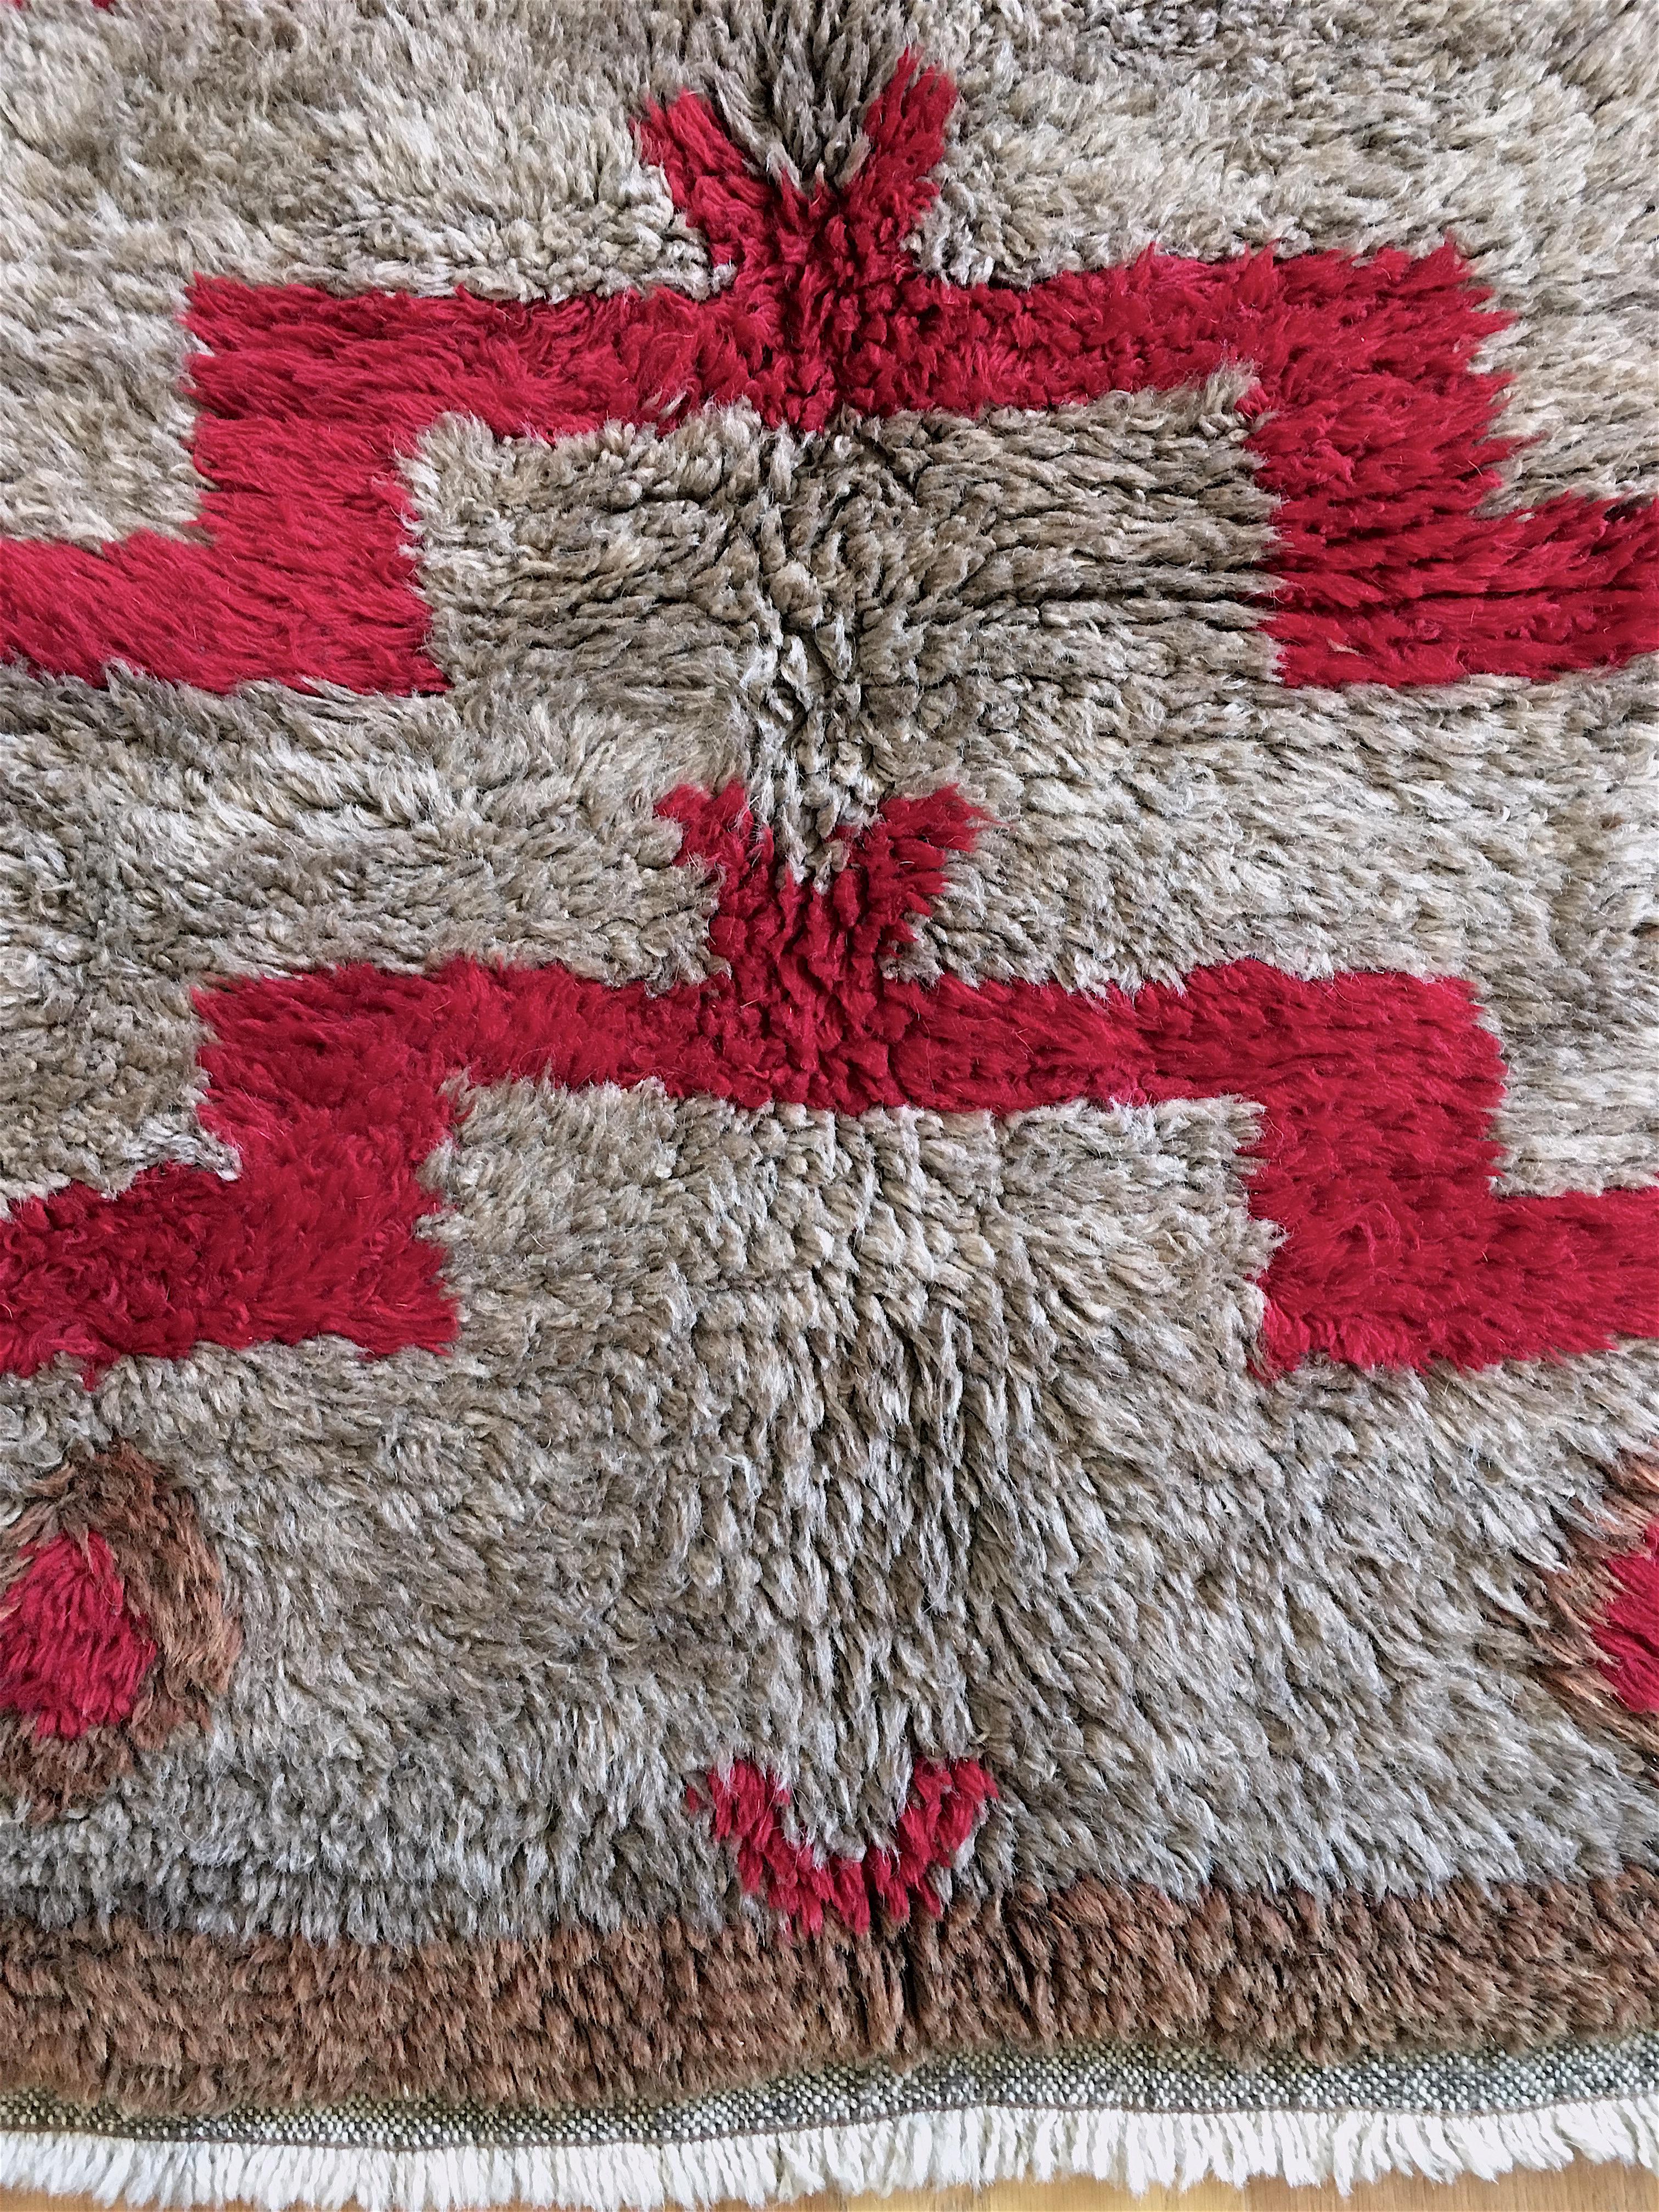 Charming Turkish Tulu or sleeping rug, of mid-20th century vintage, from central Anatolia, with full, thick pile, in natural, undyed wool, along with a main motif rendered in red, and a border of tawny brown. An interesting addition is the blue dot,